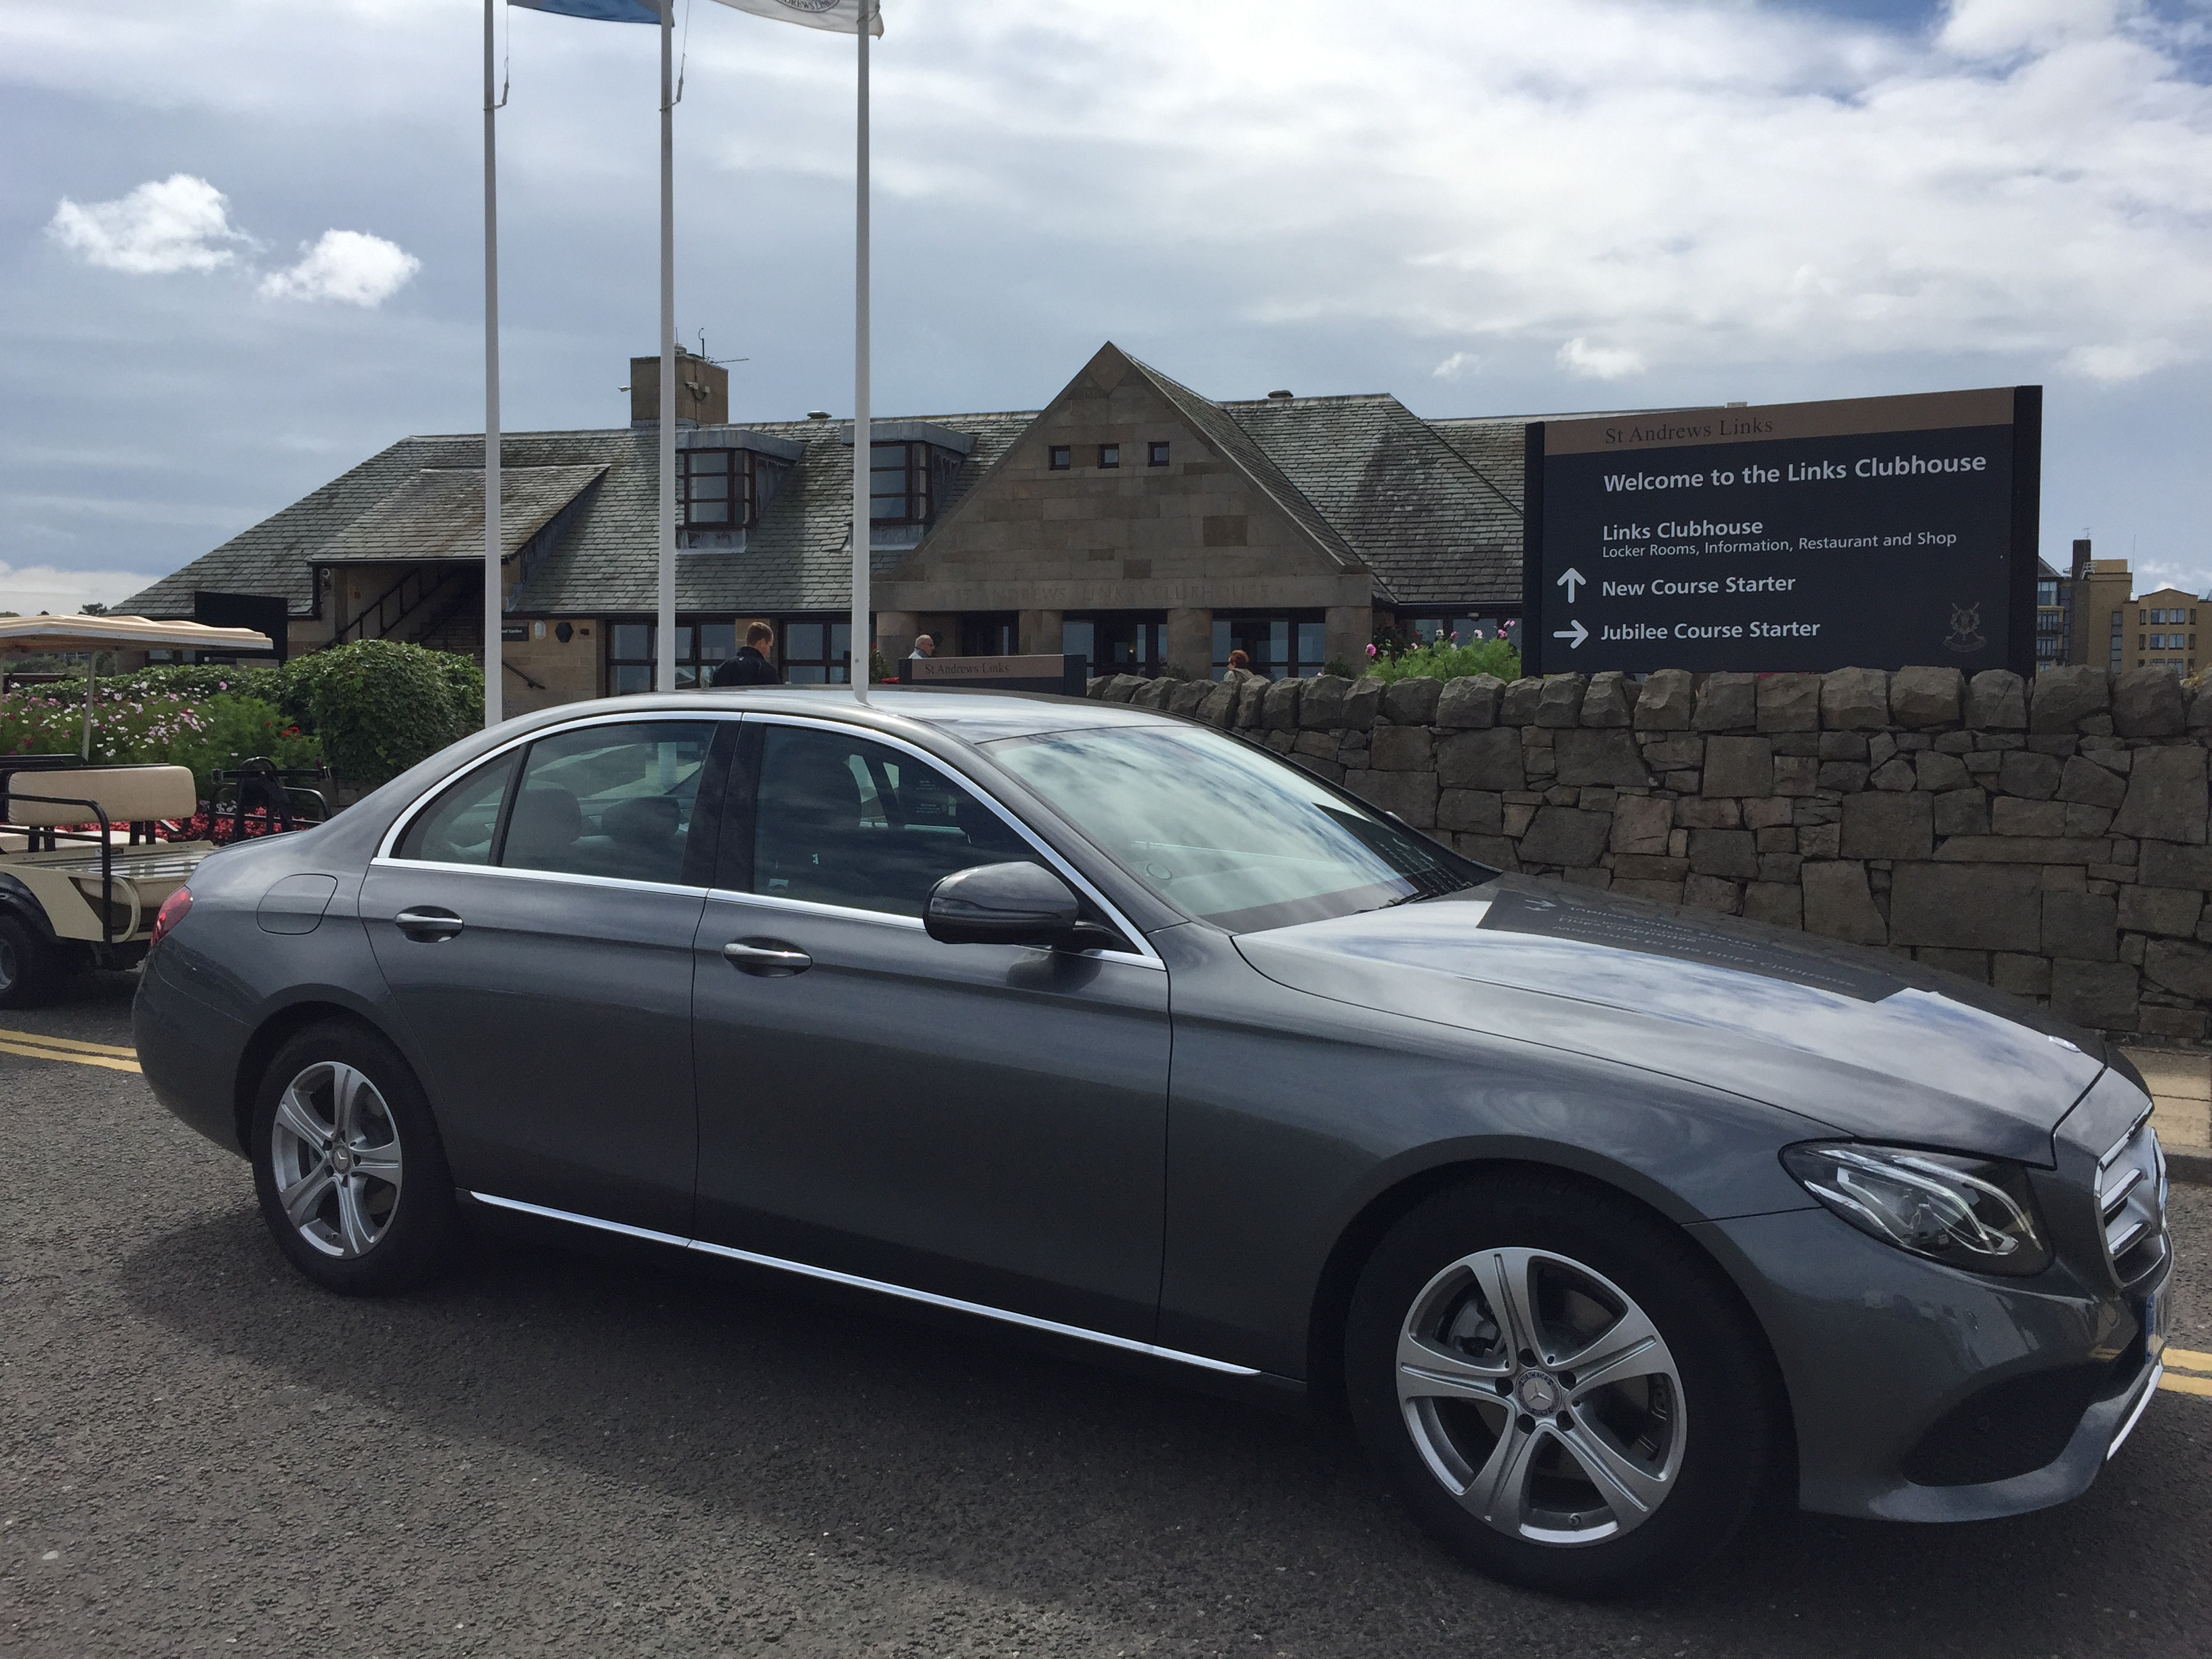 Mercedes E Class St. Andrews New Couse Golf Clubhouse